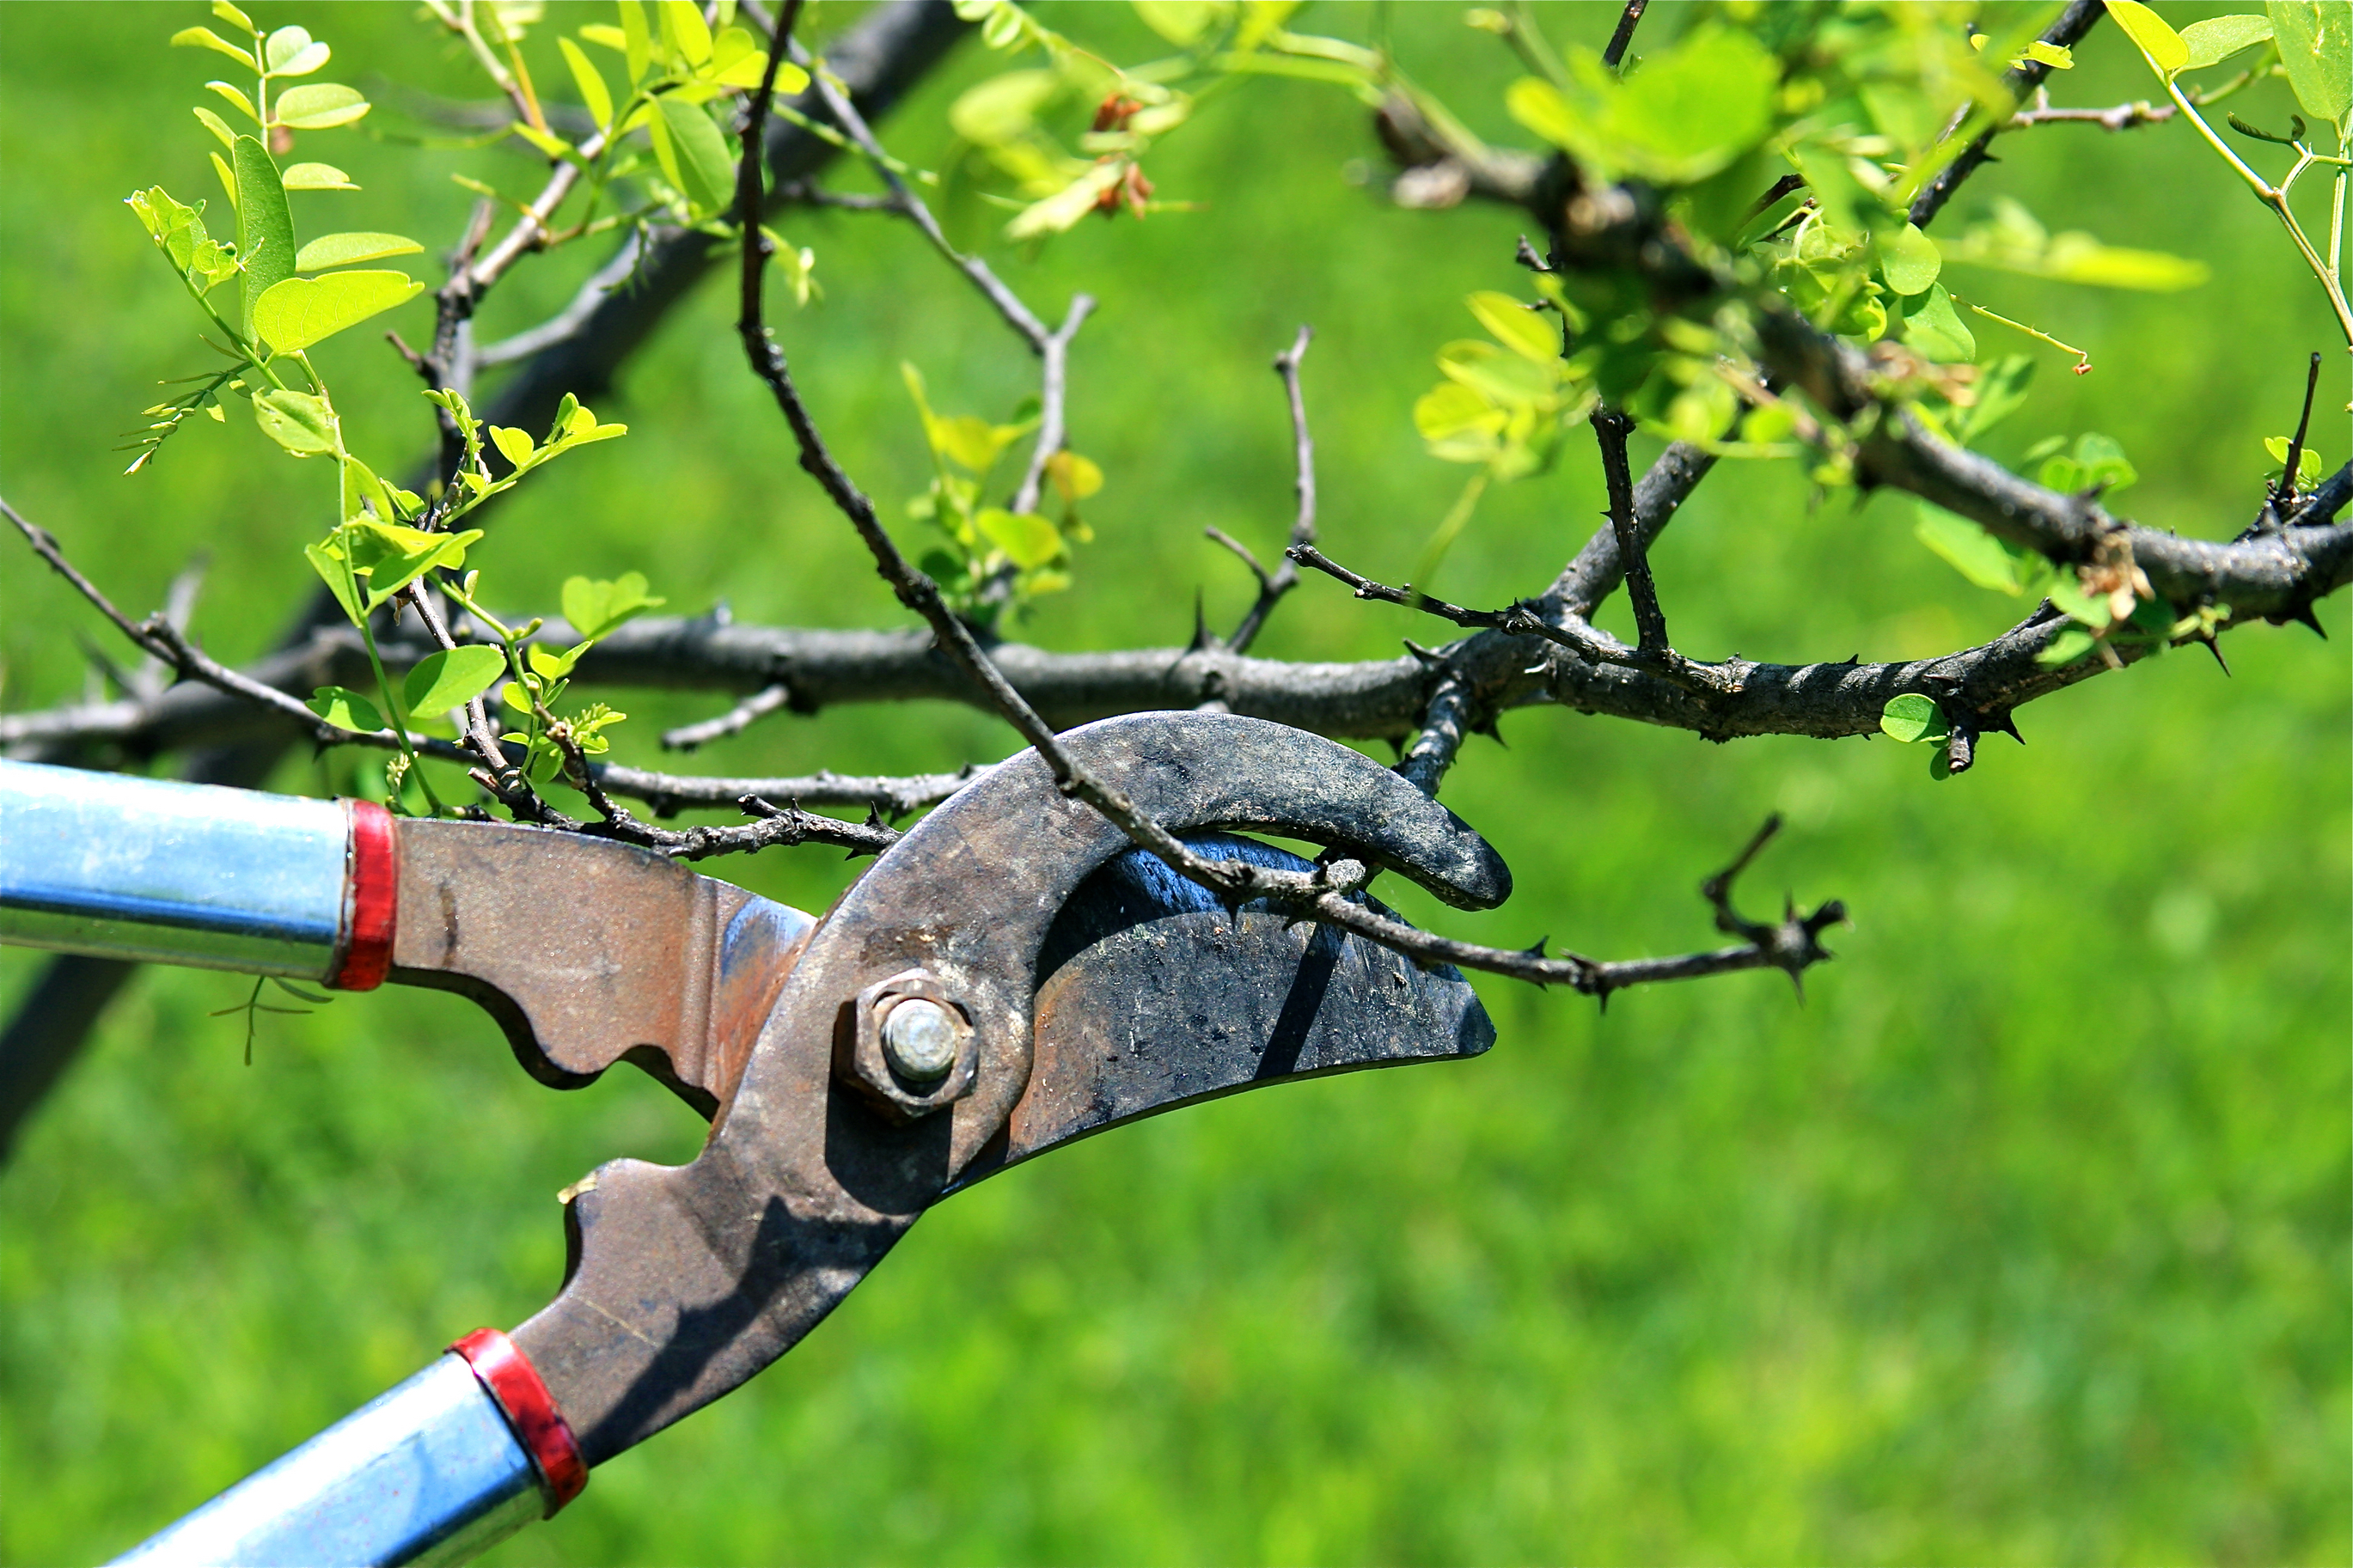 Pruning a tree branch